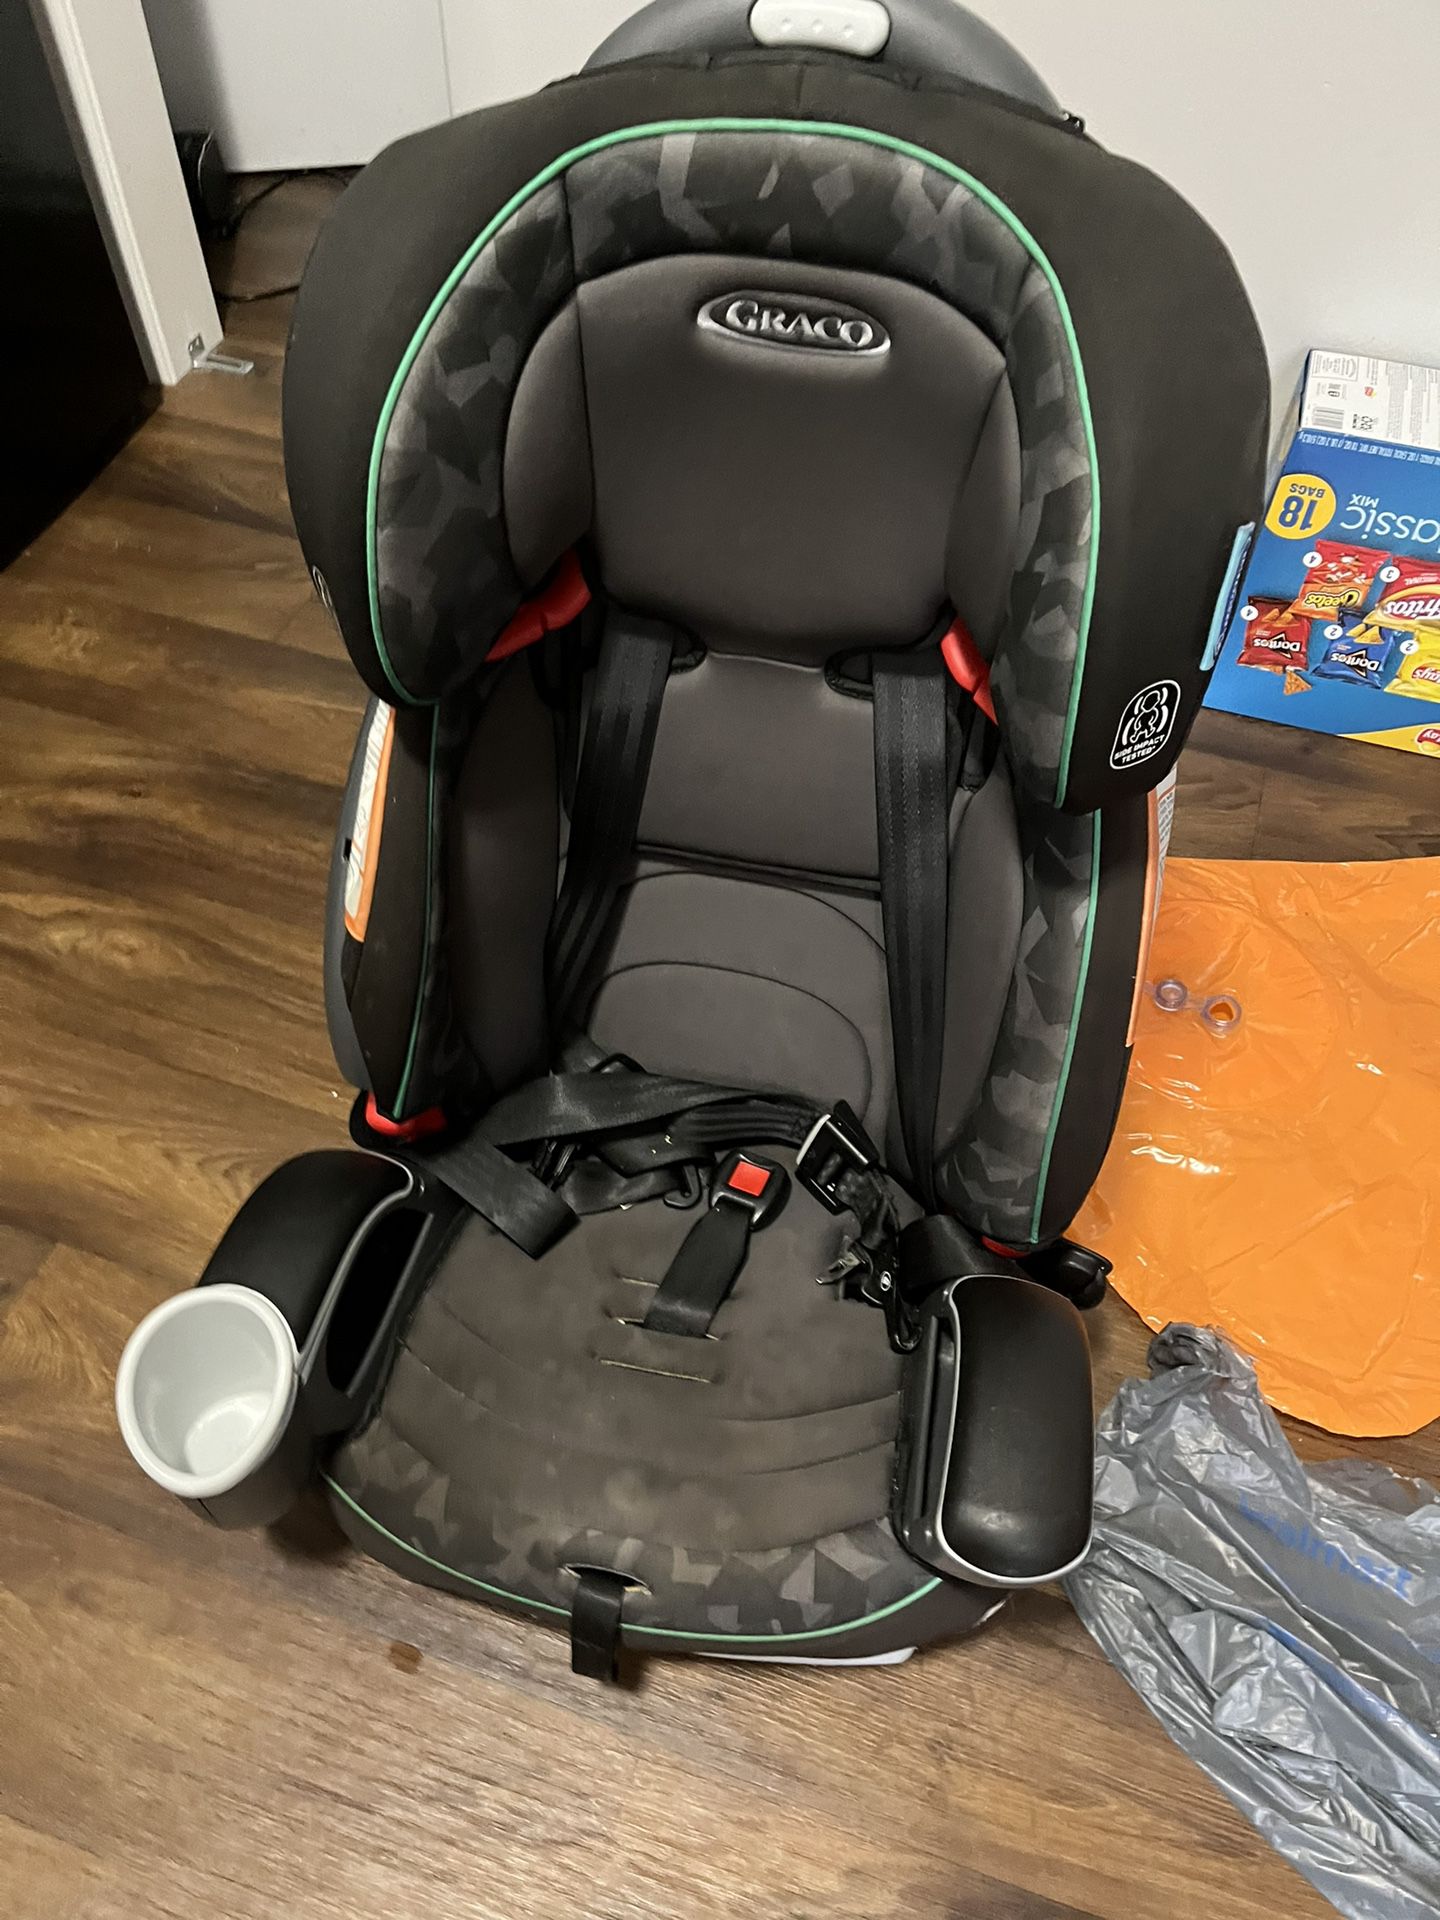 Graco  Booster Car Seat